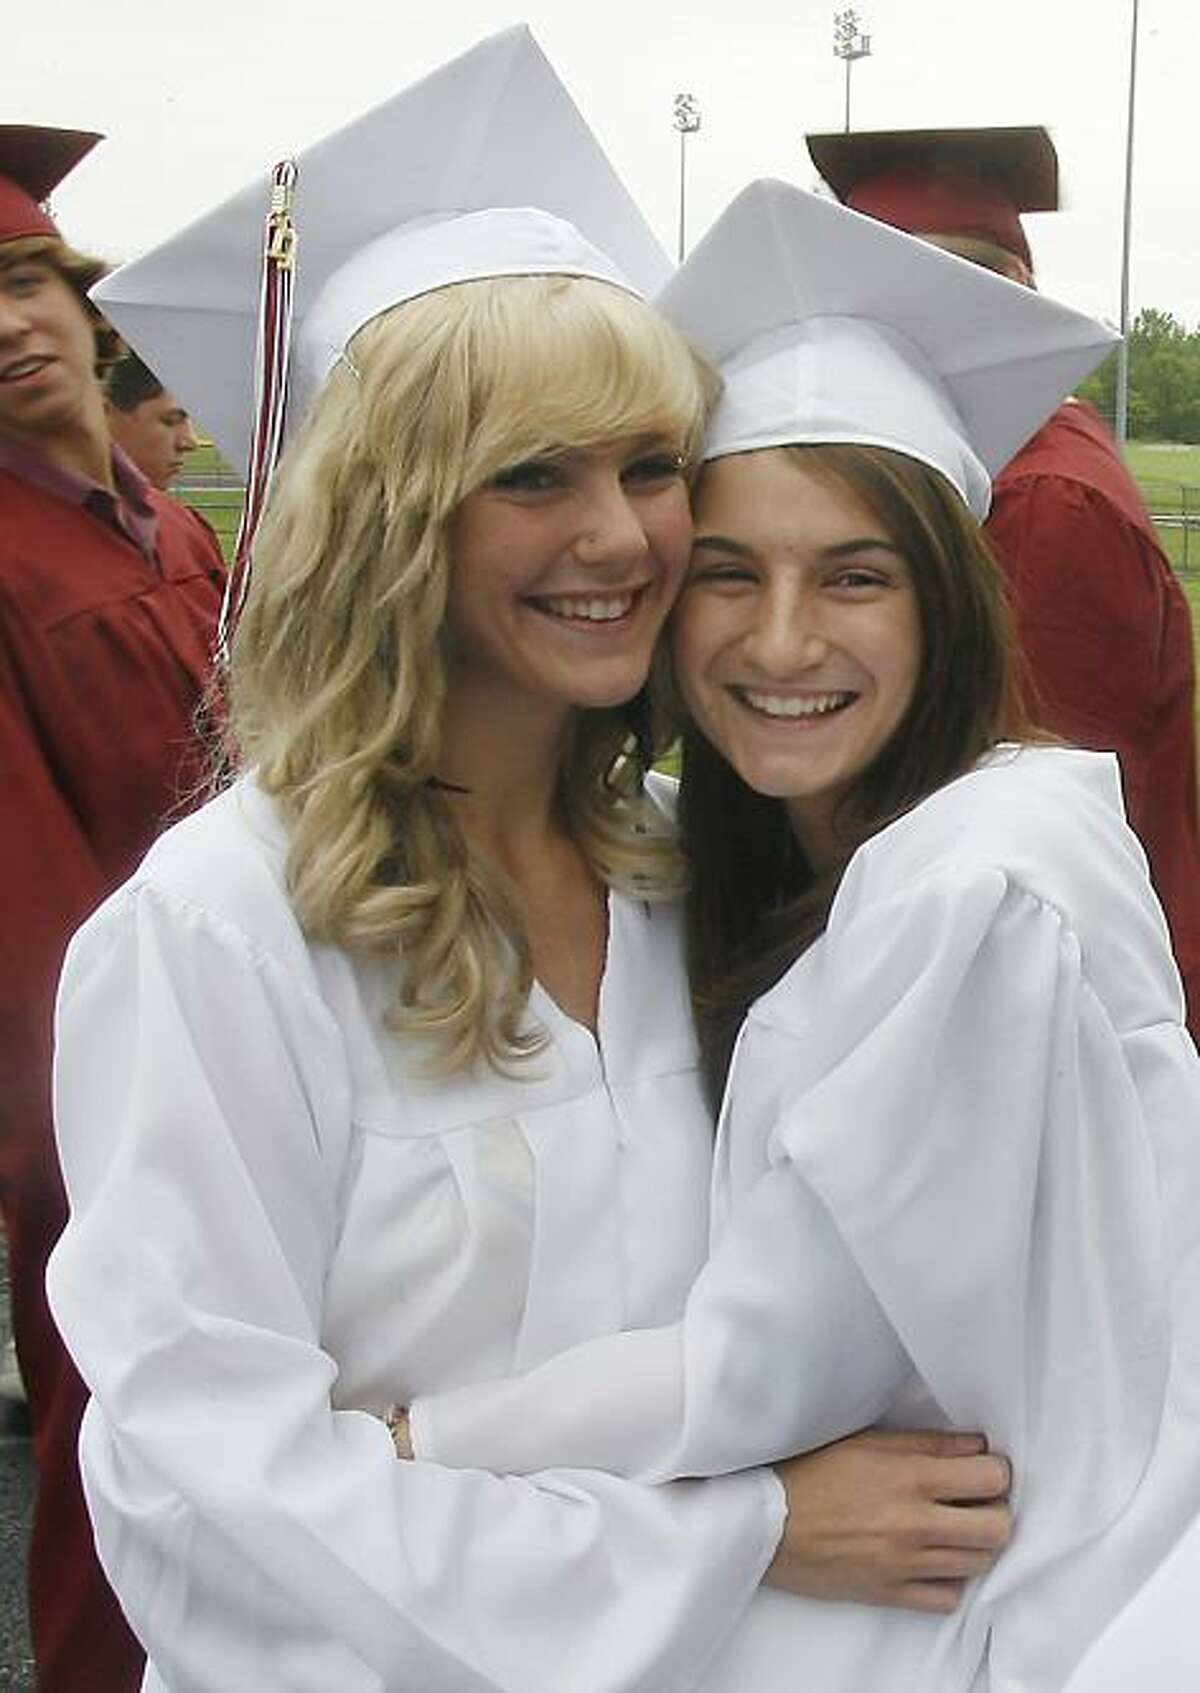 Dispatch Staff Photo by JOHN HAEGERValerie Baer and Ally Bernier pose for a classmate before the start of the 130th commencement exercises at Canastota High School on Saturday, June 25, 2011 in Canastota.